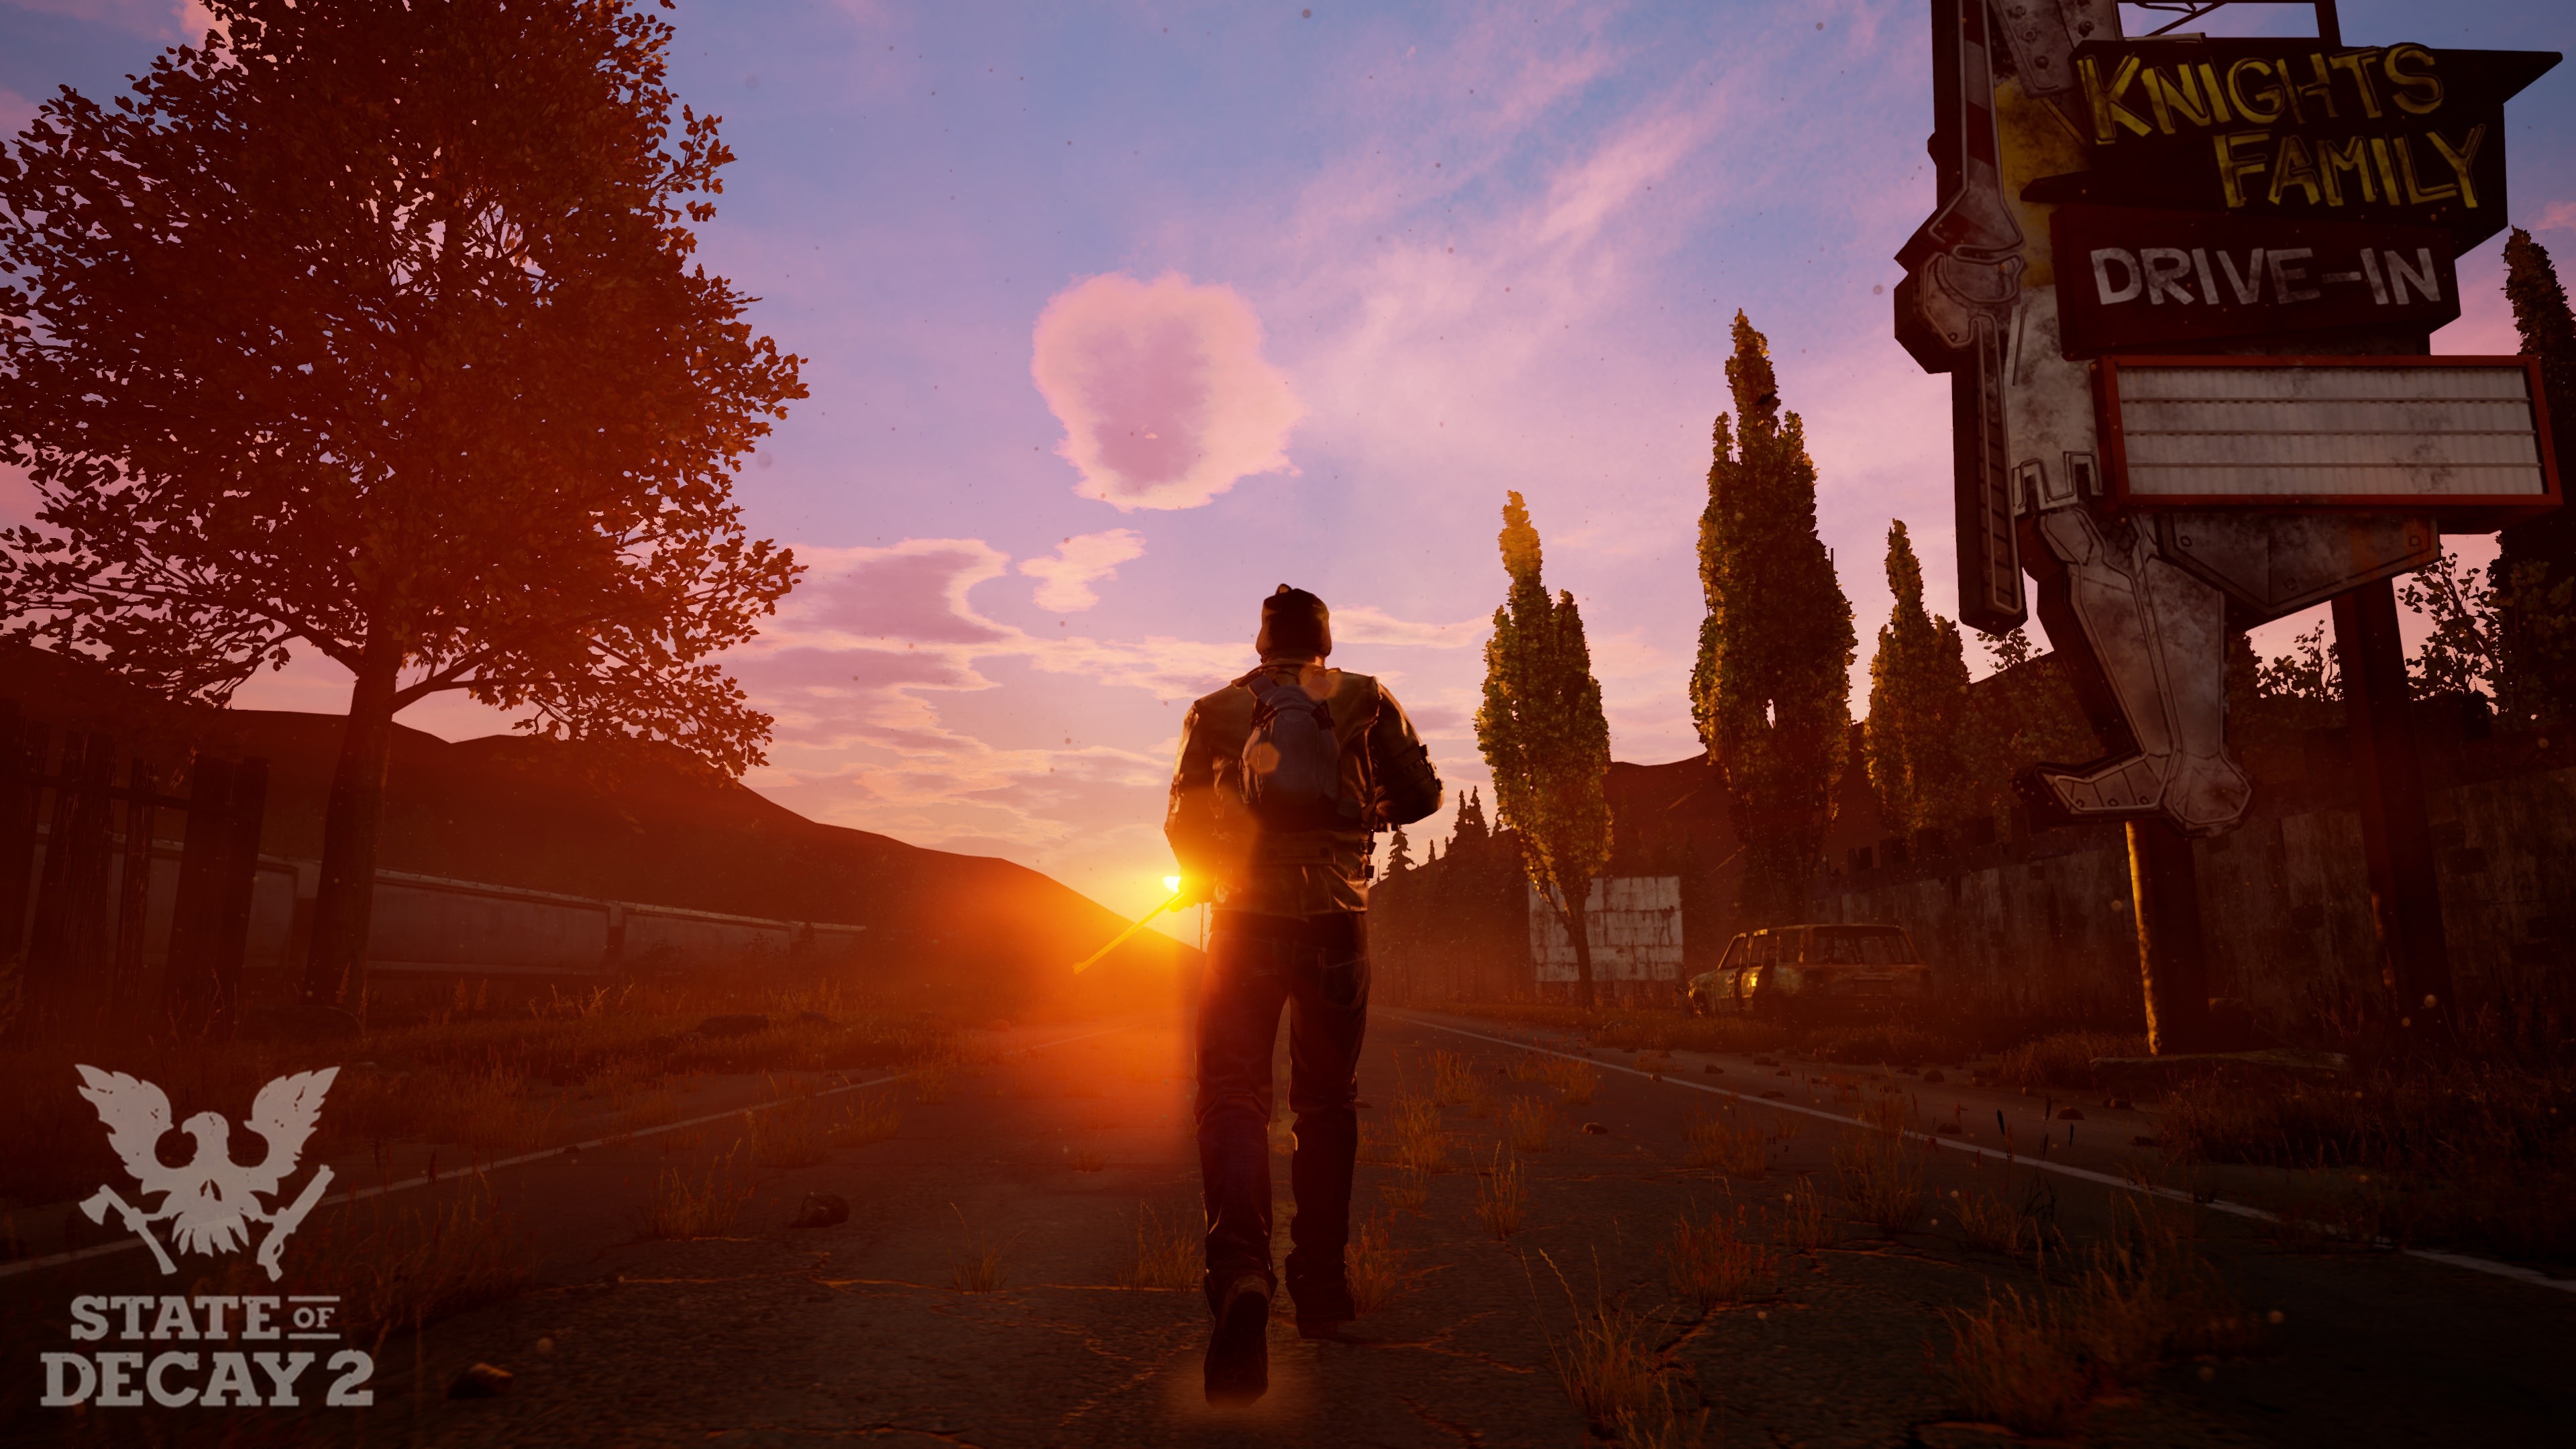 State of decay 2 influence guide